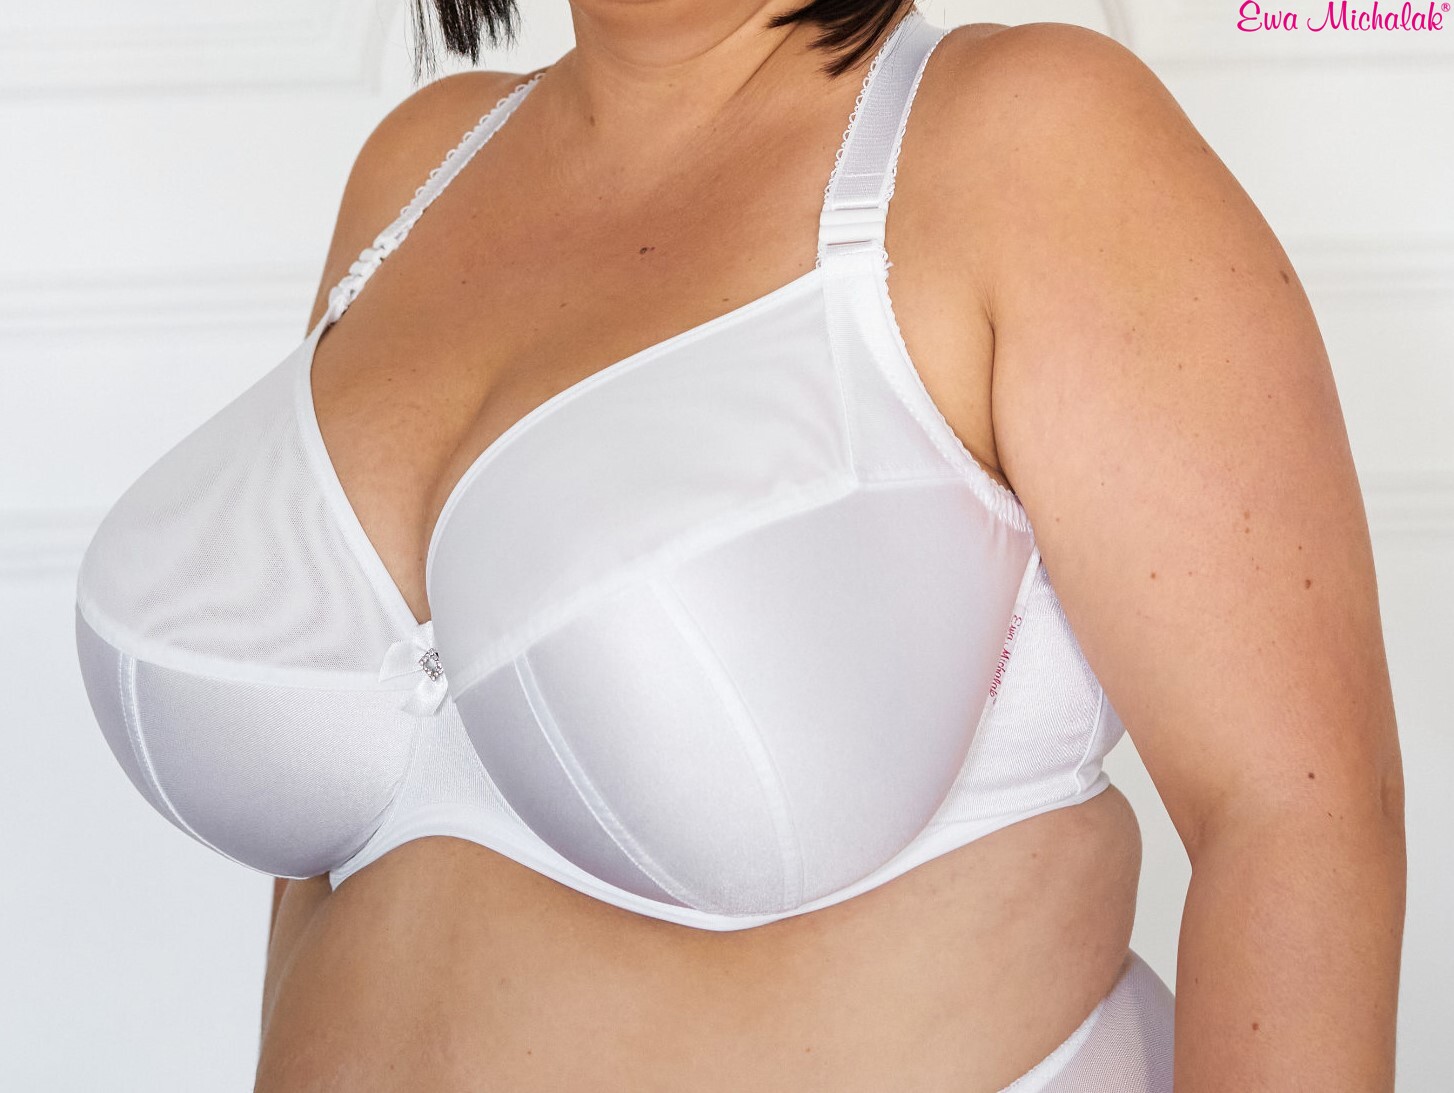 Multiway bras with convertible straps